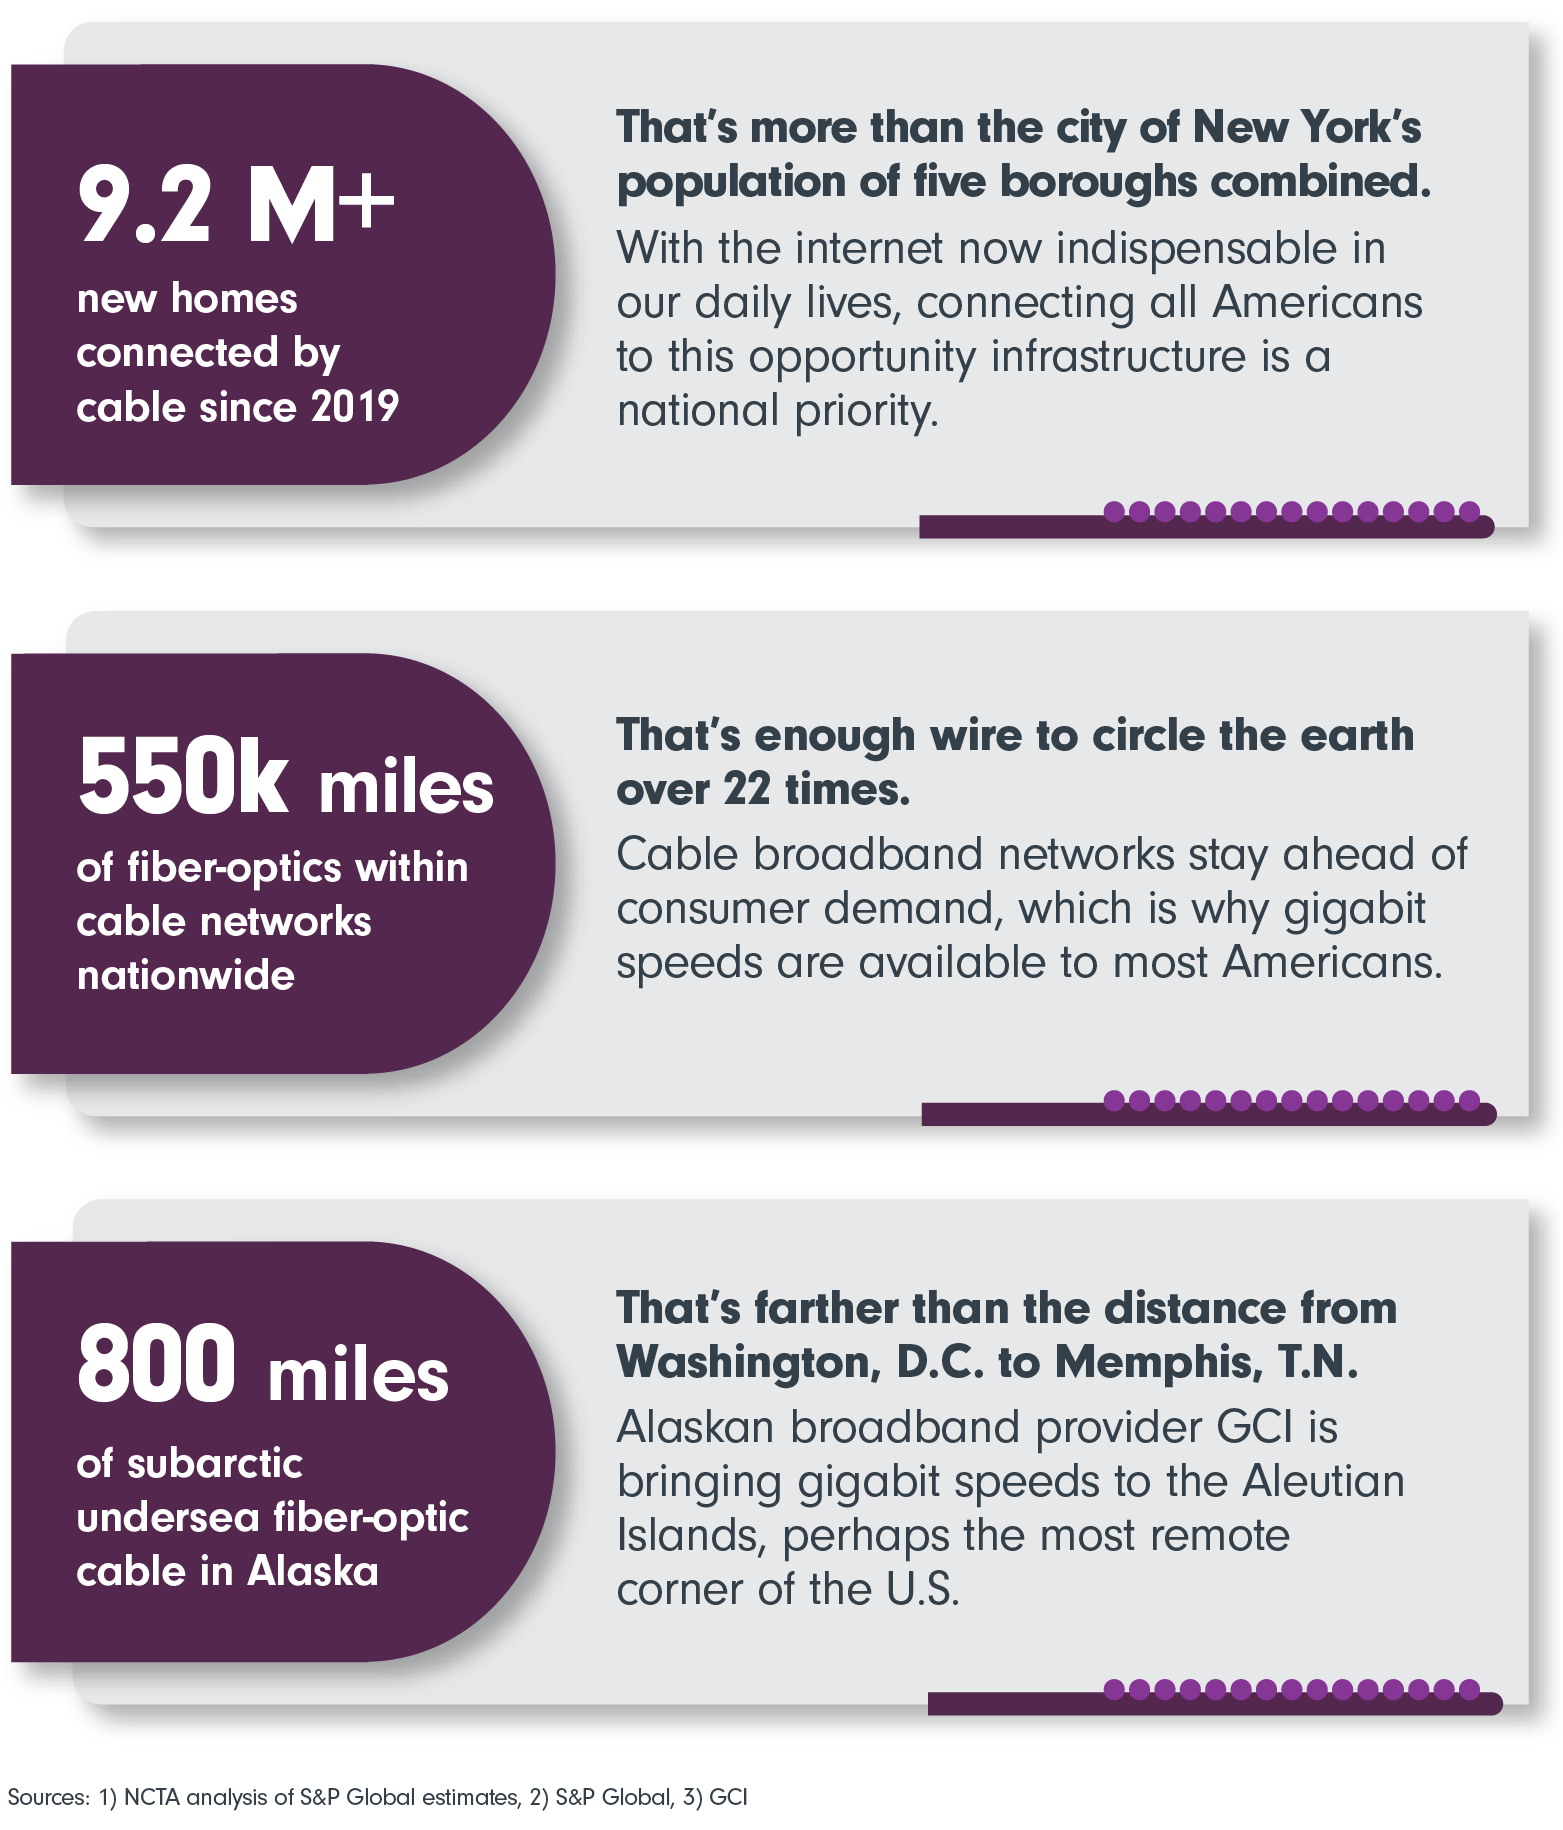 9.2+ m new homes connected by cable since 2019; 550,000 miles  of fiber-optics within cable networks nationwide; 800 miles  of subarctic undersea fiber-optic cable in Alaska